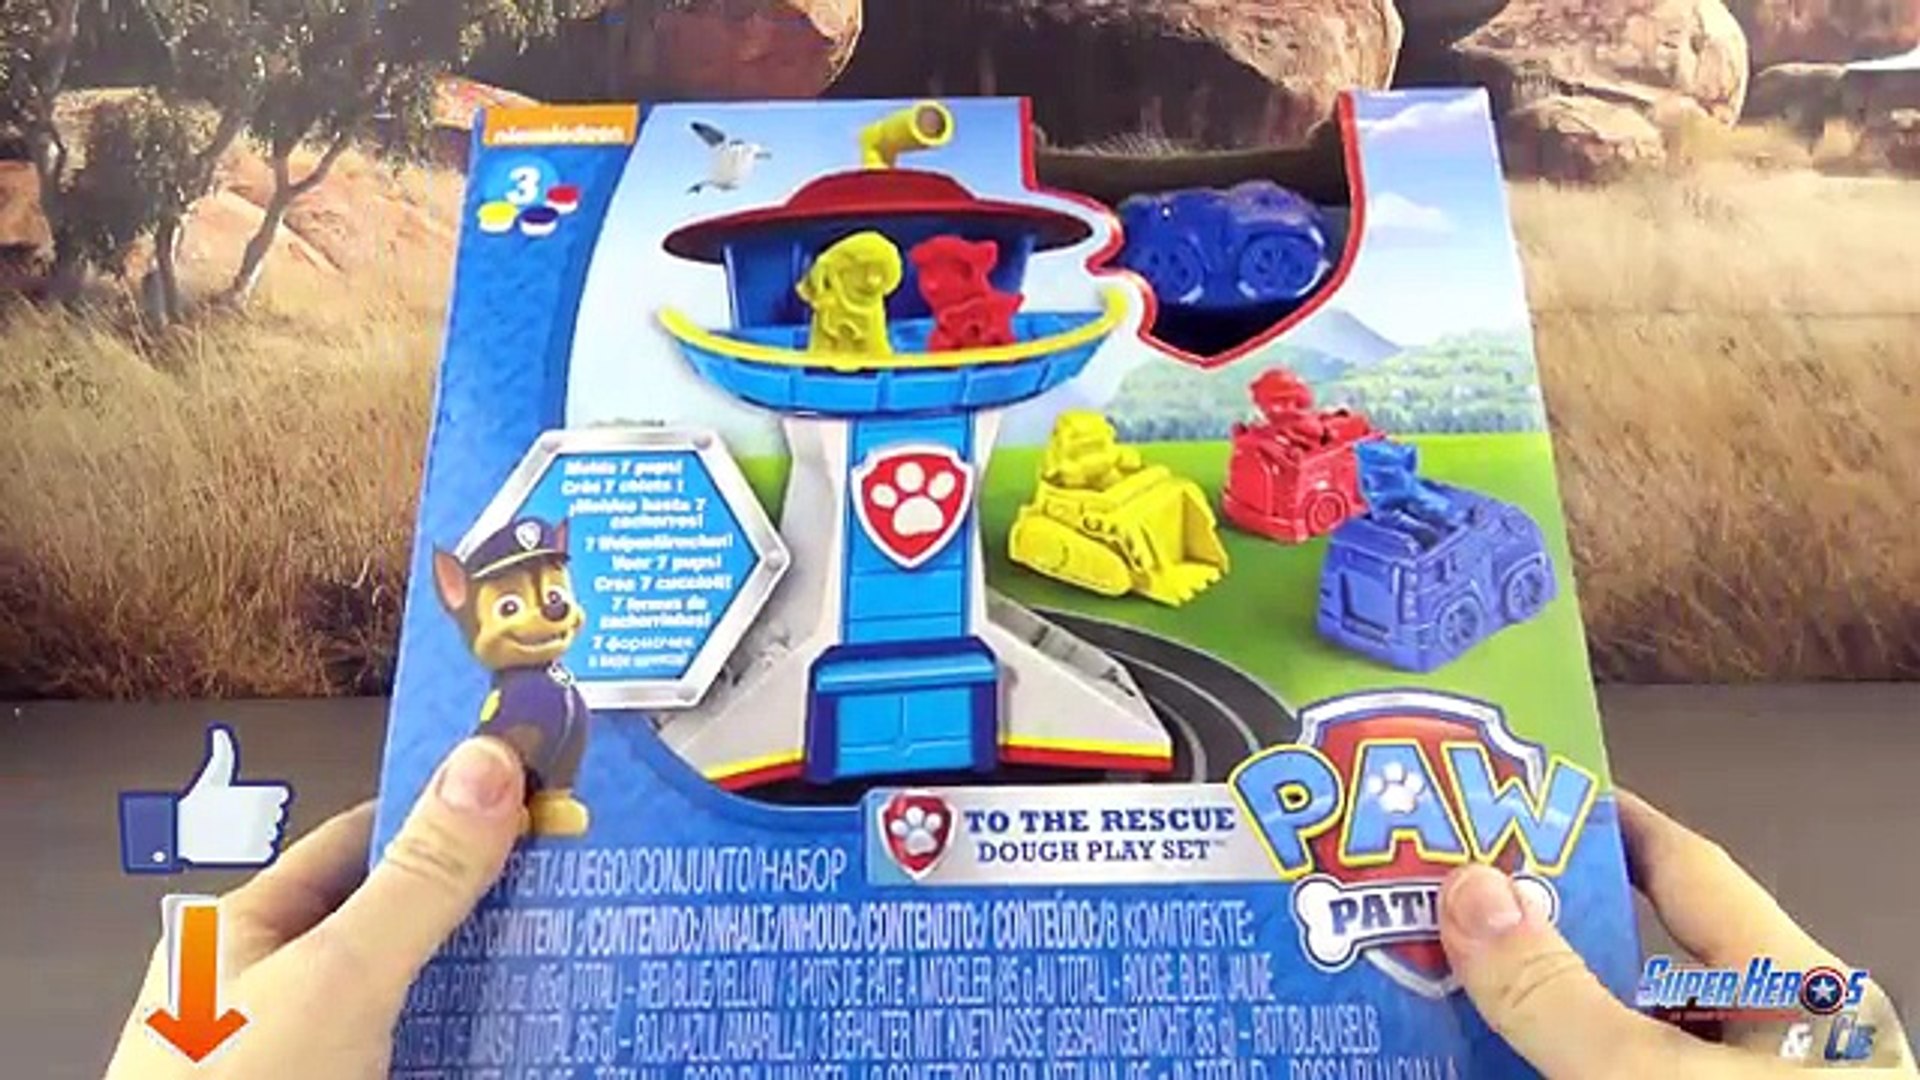 Paw Patrol Play Doh Mold Set To The Rescue Pat Patrouille Pate à Modeler  Patrulla de Cachorros Toy - video Dailymotion